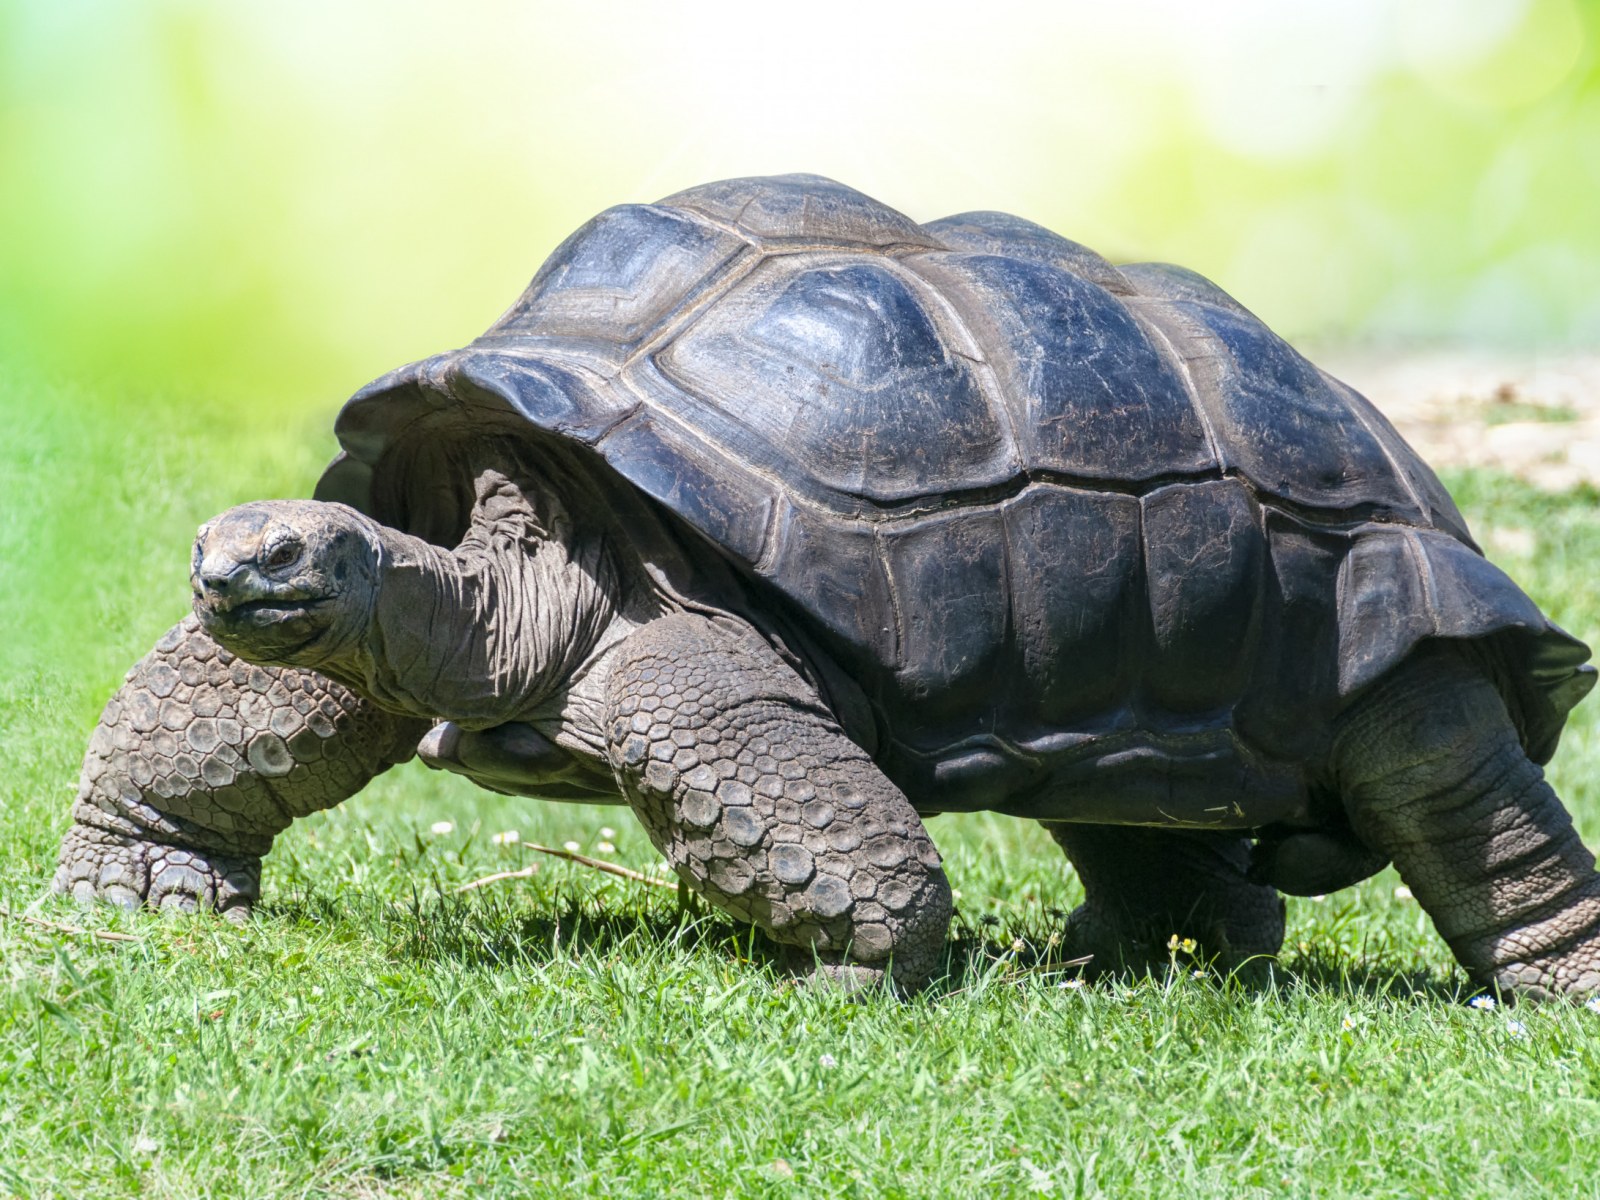 Ten Interesting Facts About Tortoises, From Swimming to Hibernation